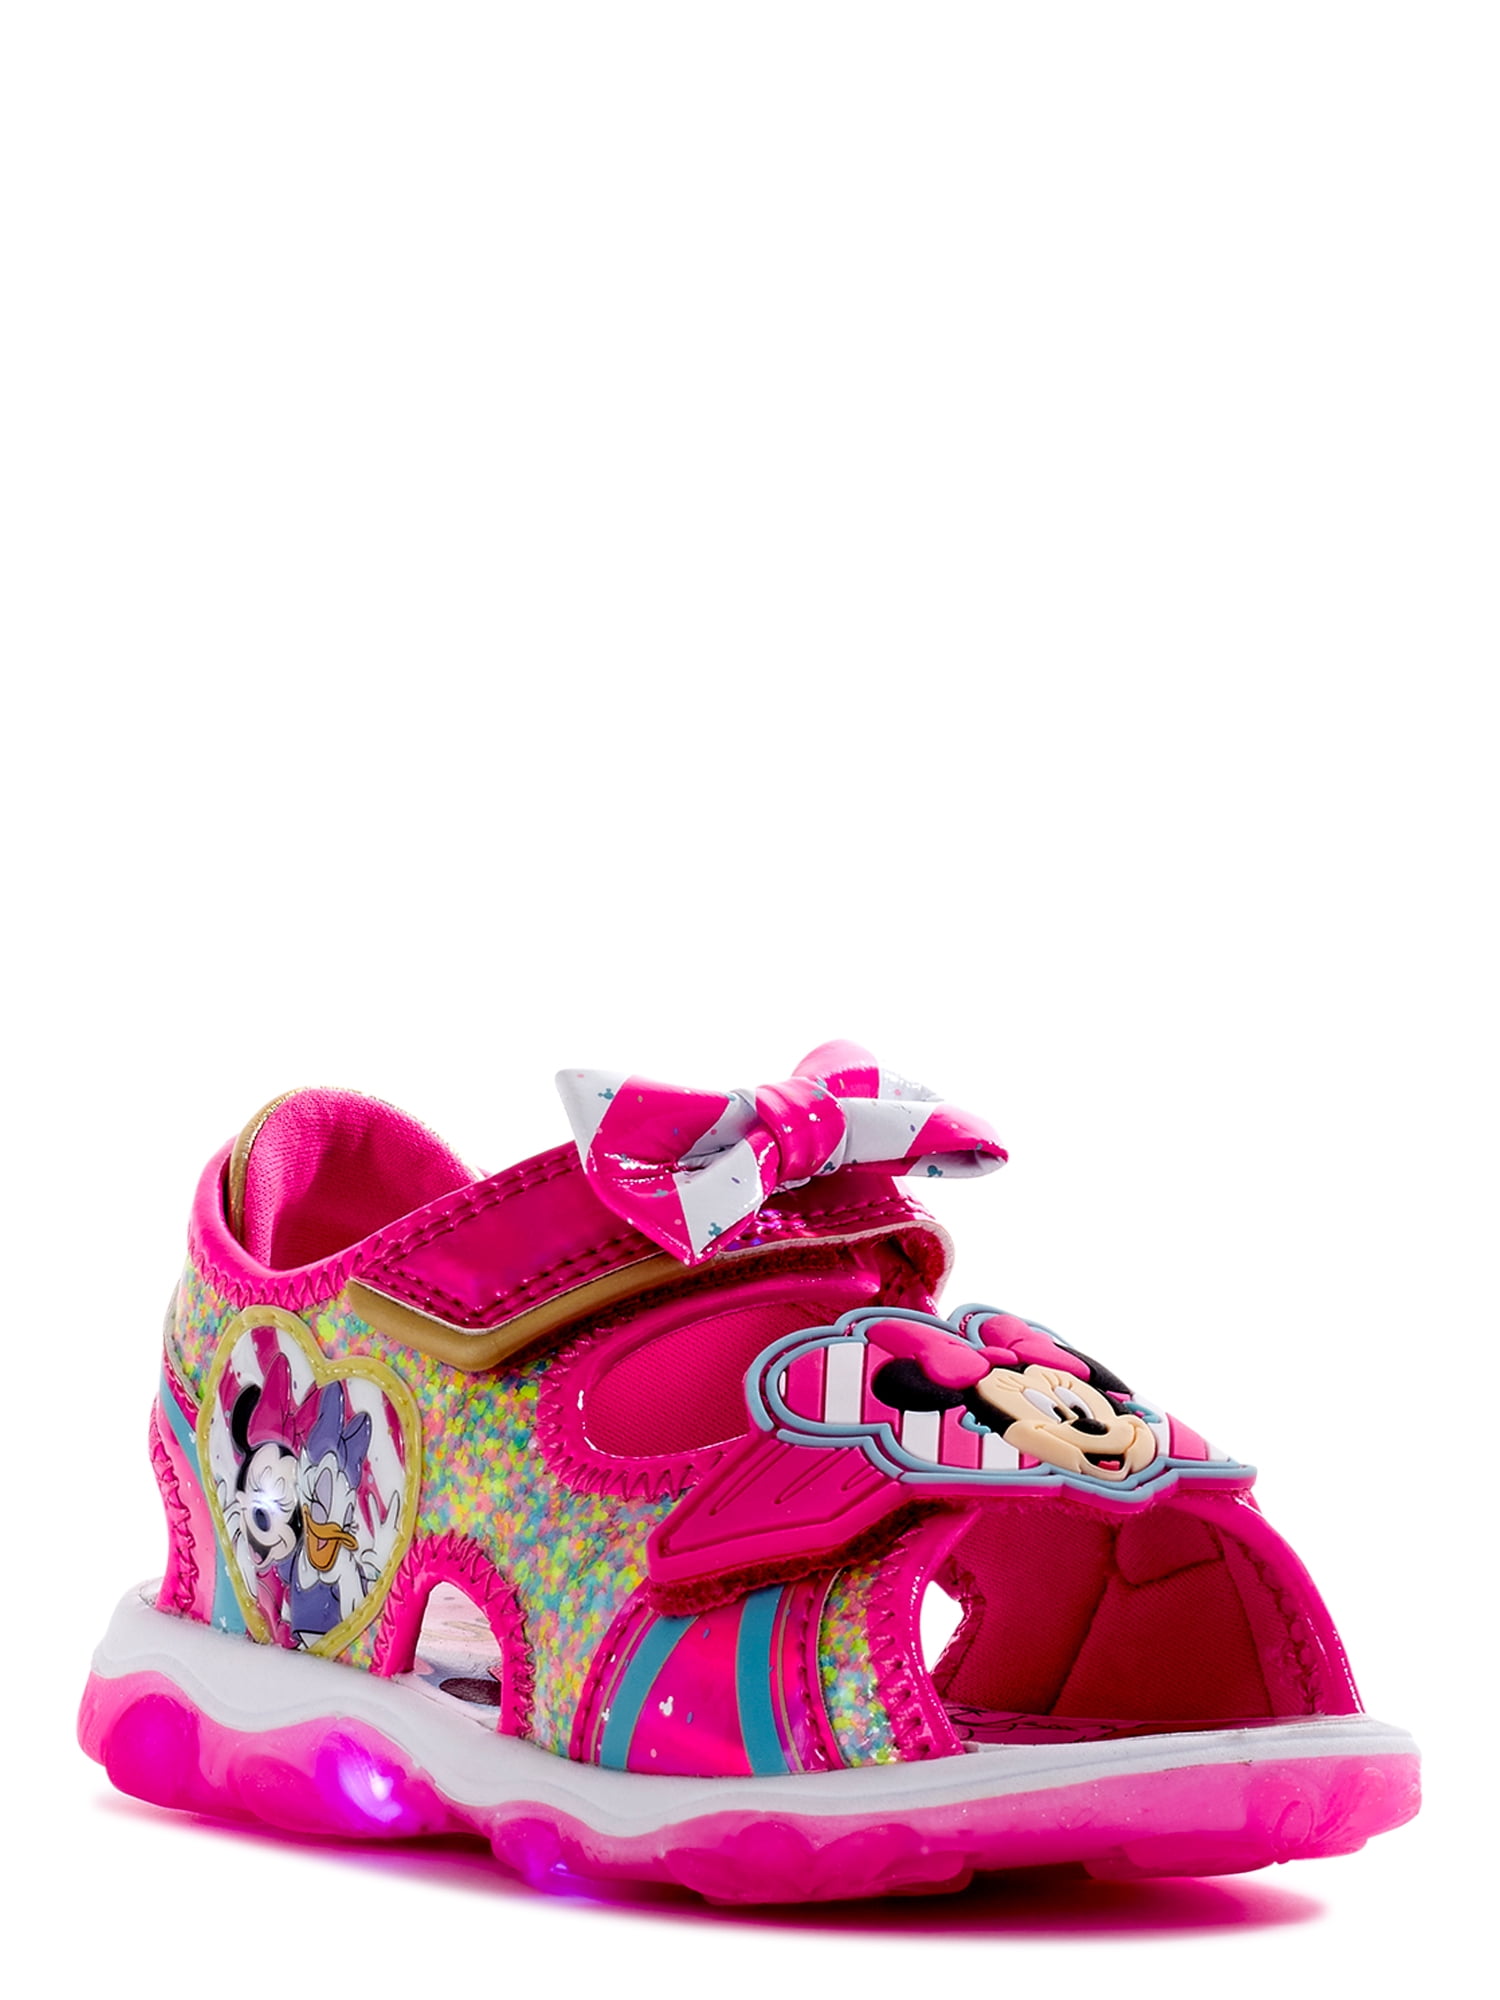 Disney Women's Shoes by Native - Minnie Mouse